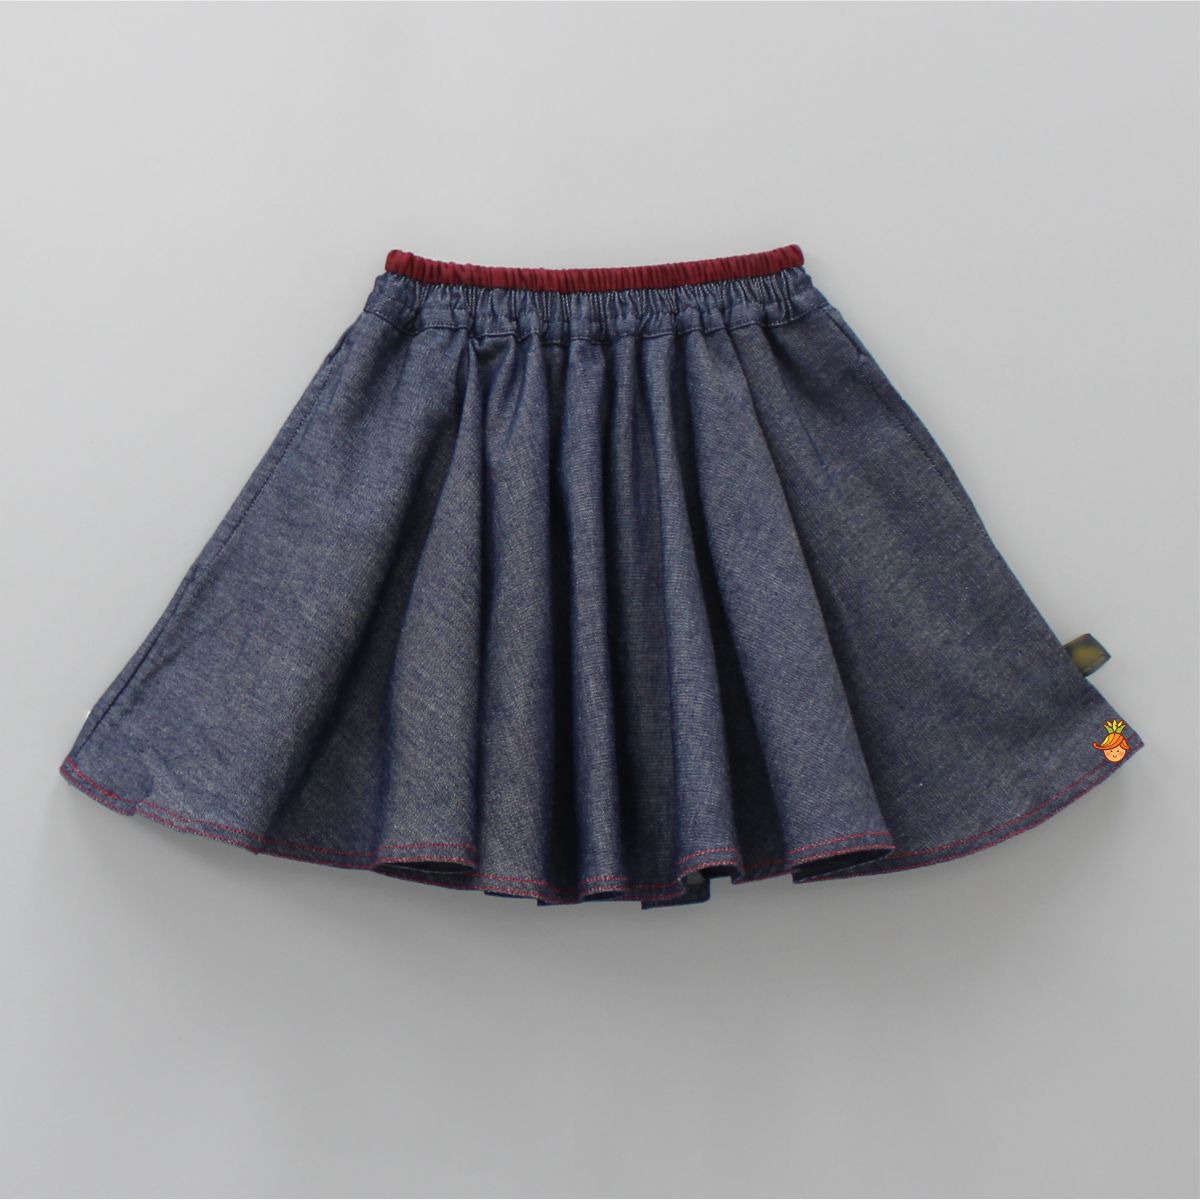 Hand Block Printed Rust Top And Pocket Detail Skirt Style Shorts